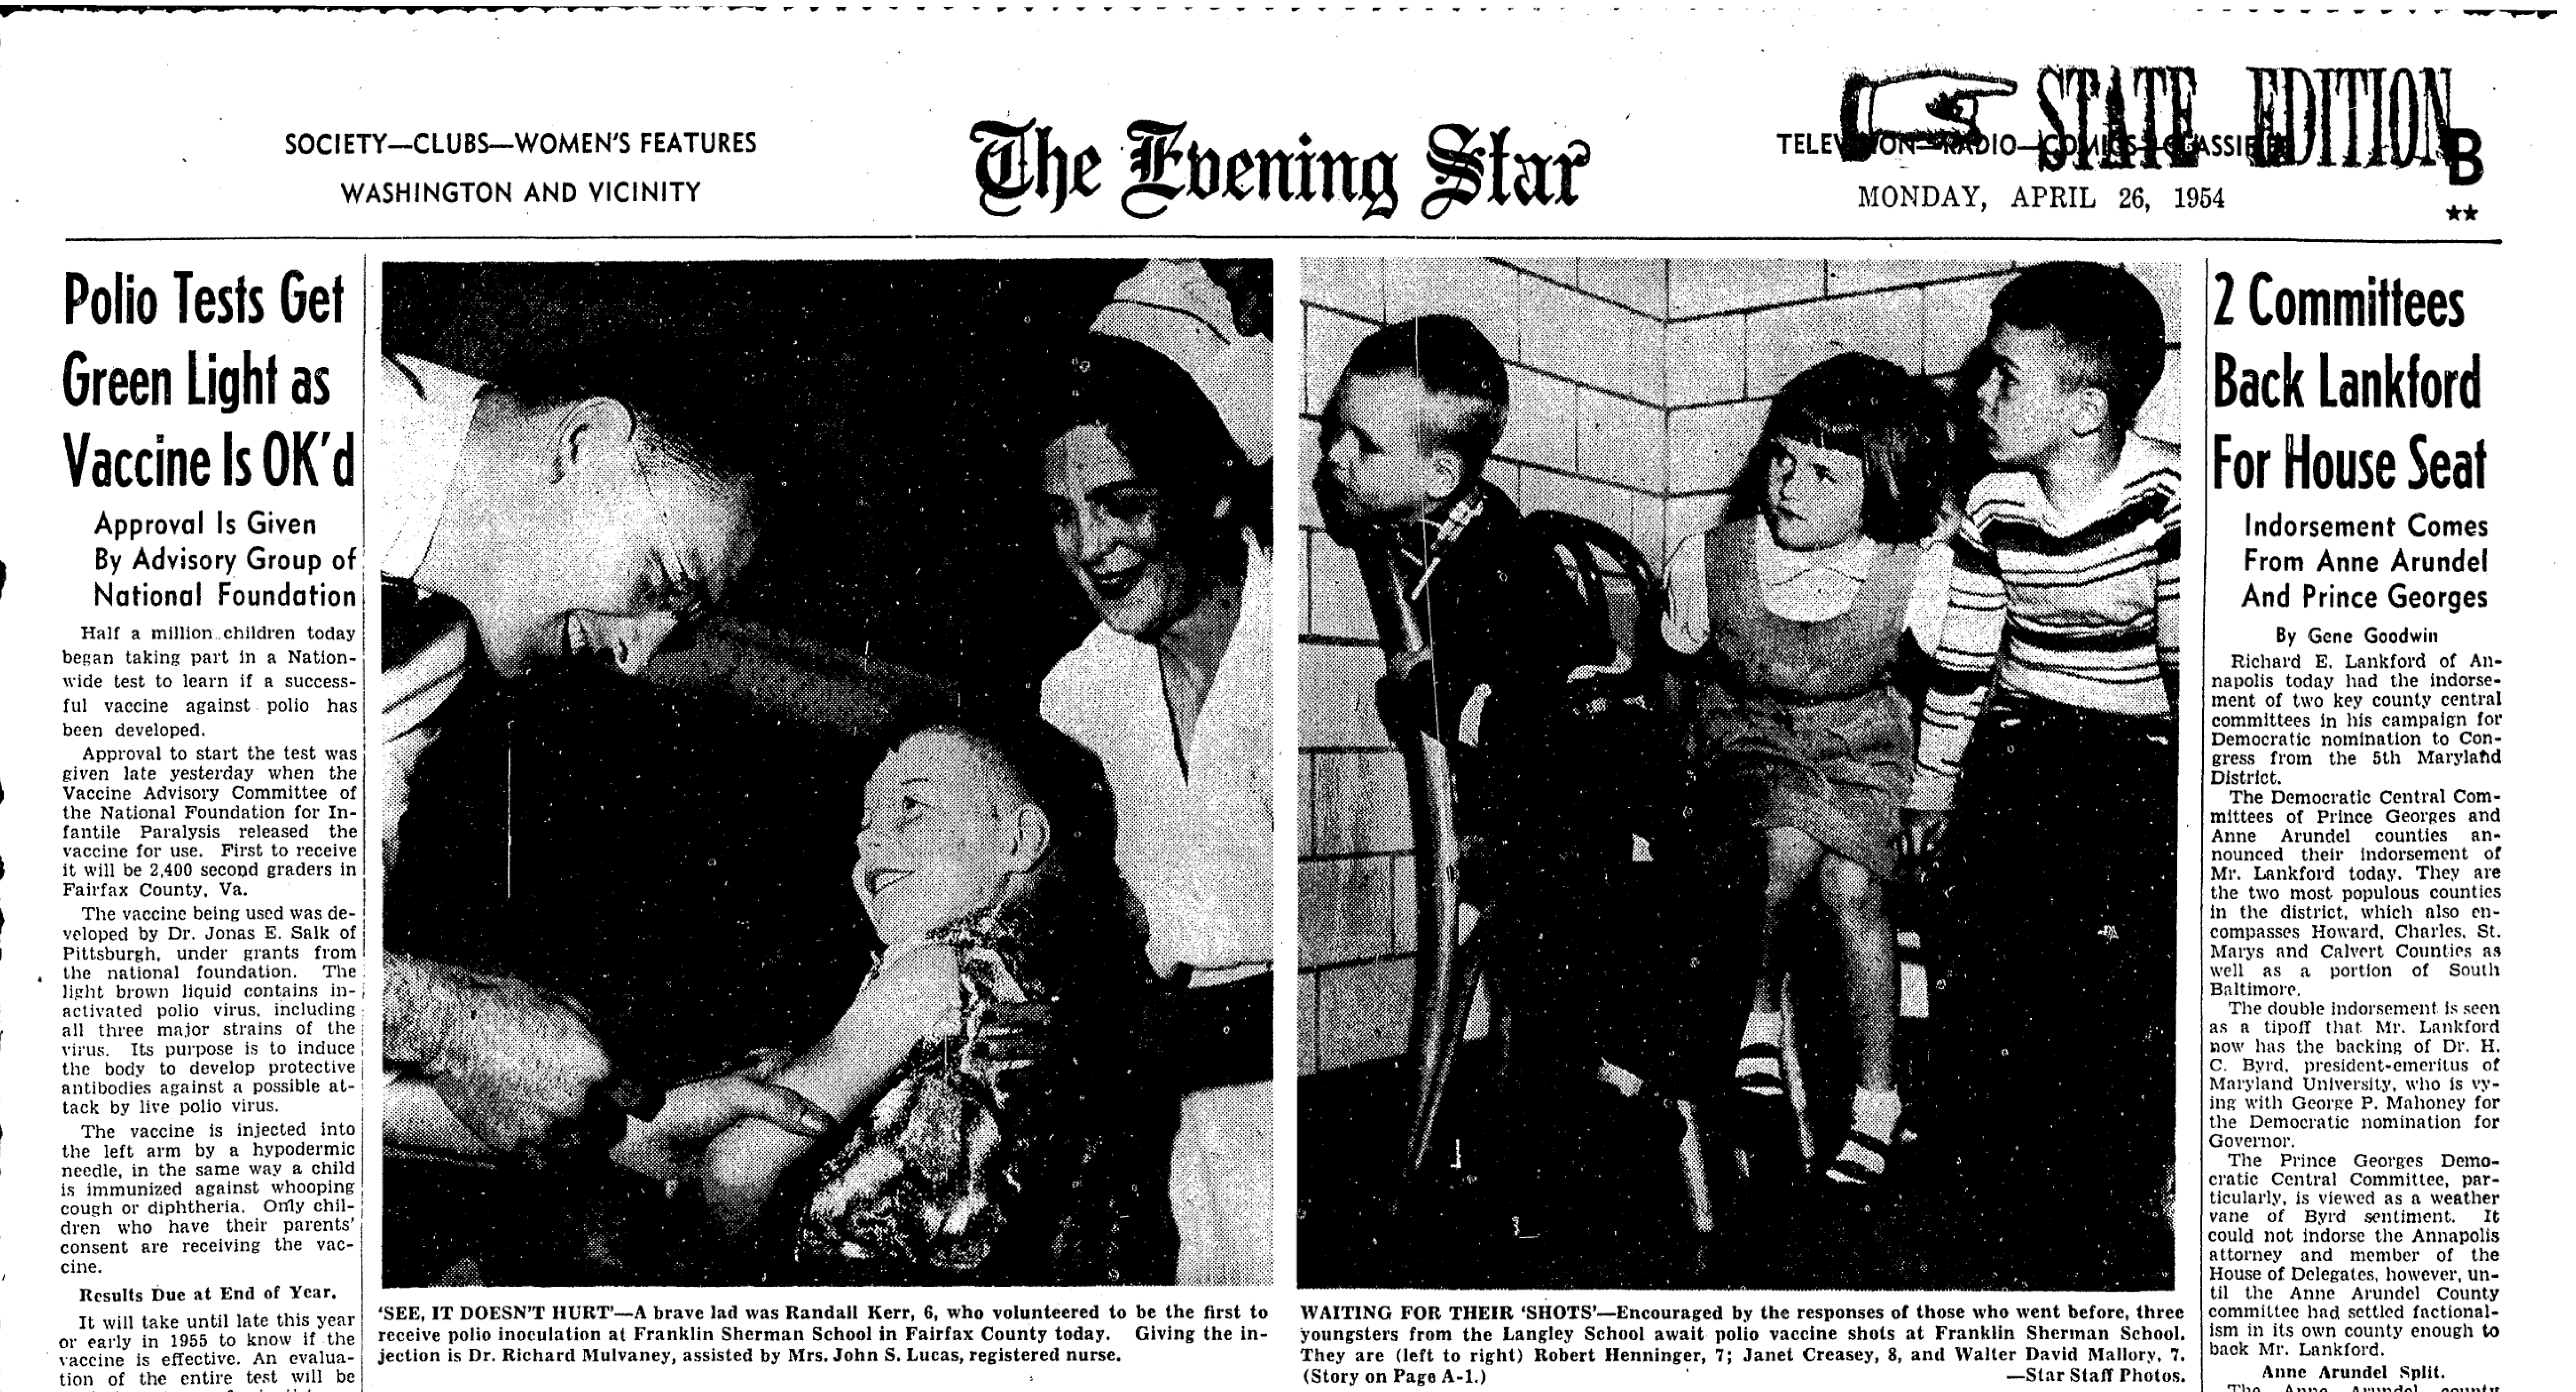 Evening Star News clip of Walt Mallory, former FCPS student, waiting to be vaccinated against polio in 1954.